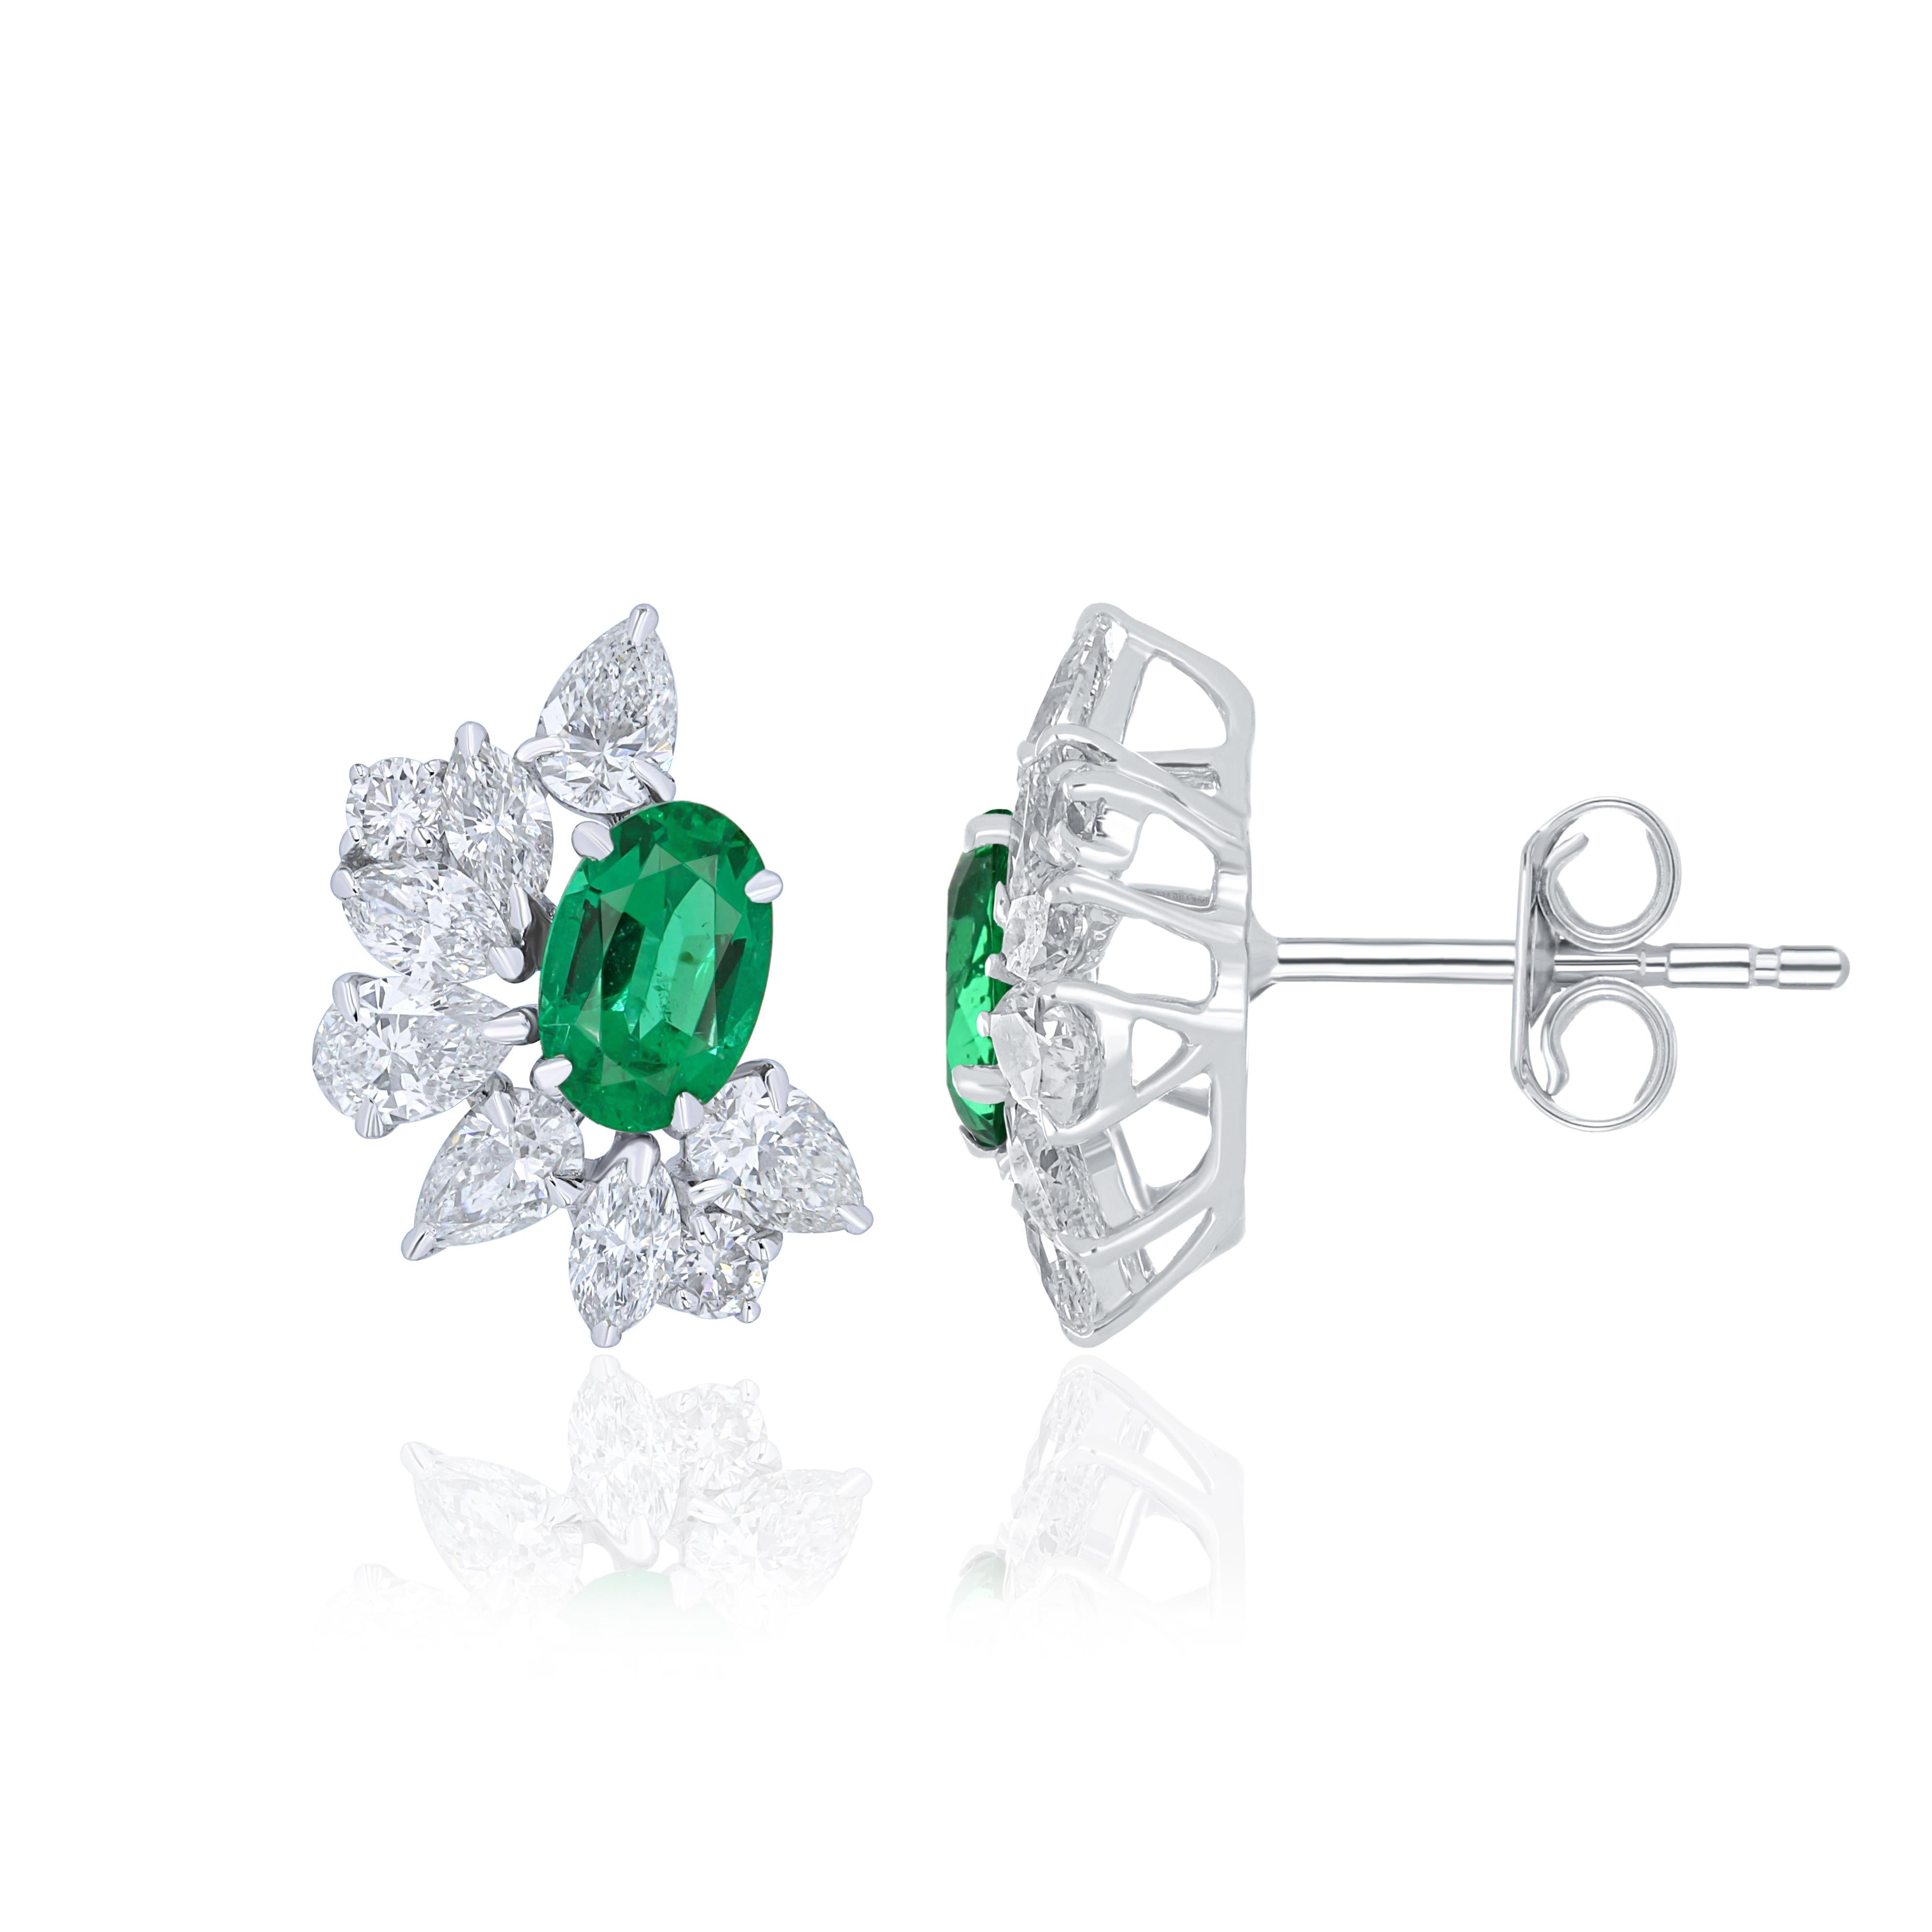 Oval Cut Emerald and Diamond Earring 18 Karat White Gold Handcraft Jewelry, Birth Stone For Sale